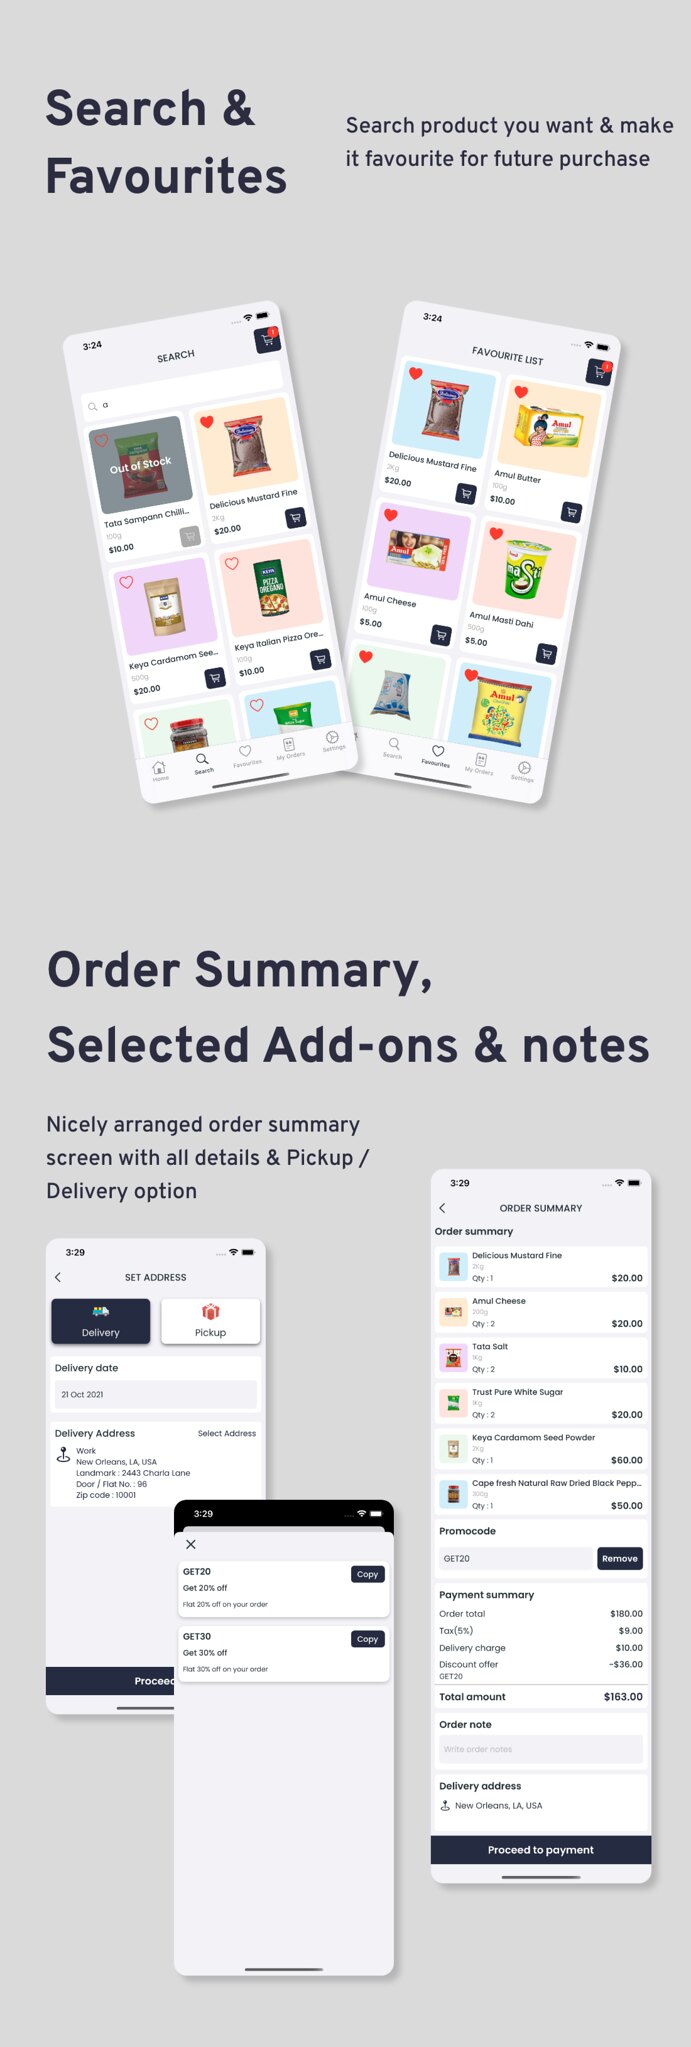 Single Grocery, Food, Pharmacy Store Android User & Delivery Boy Apps With Backend Admin Panel - 7